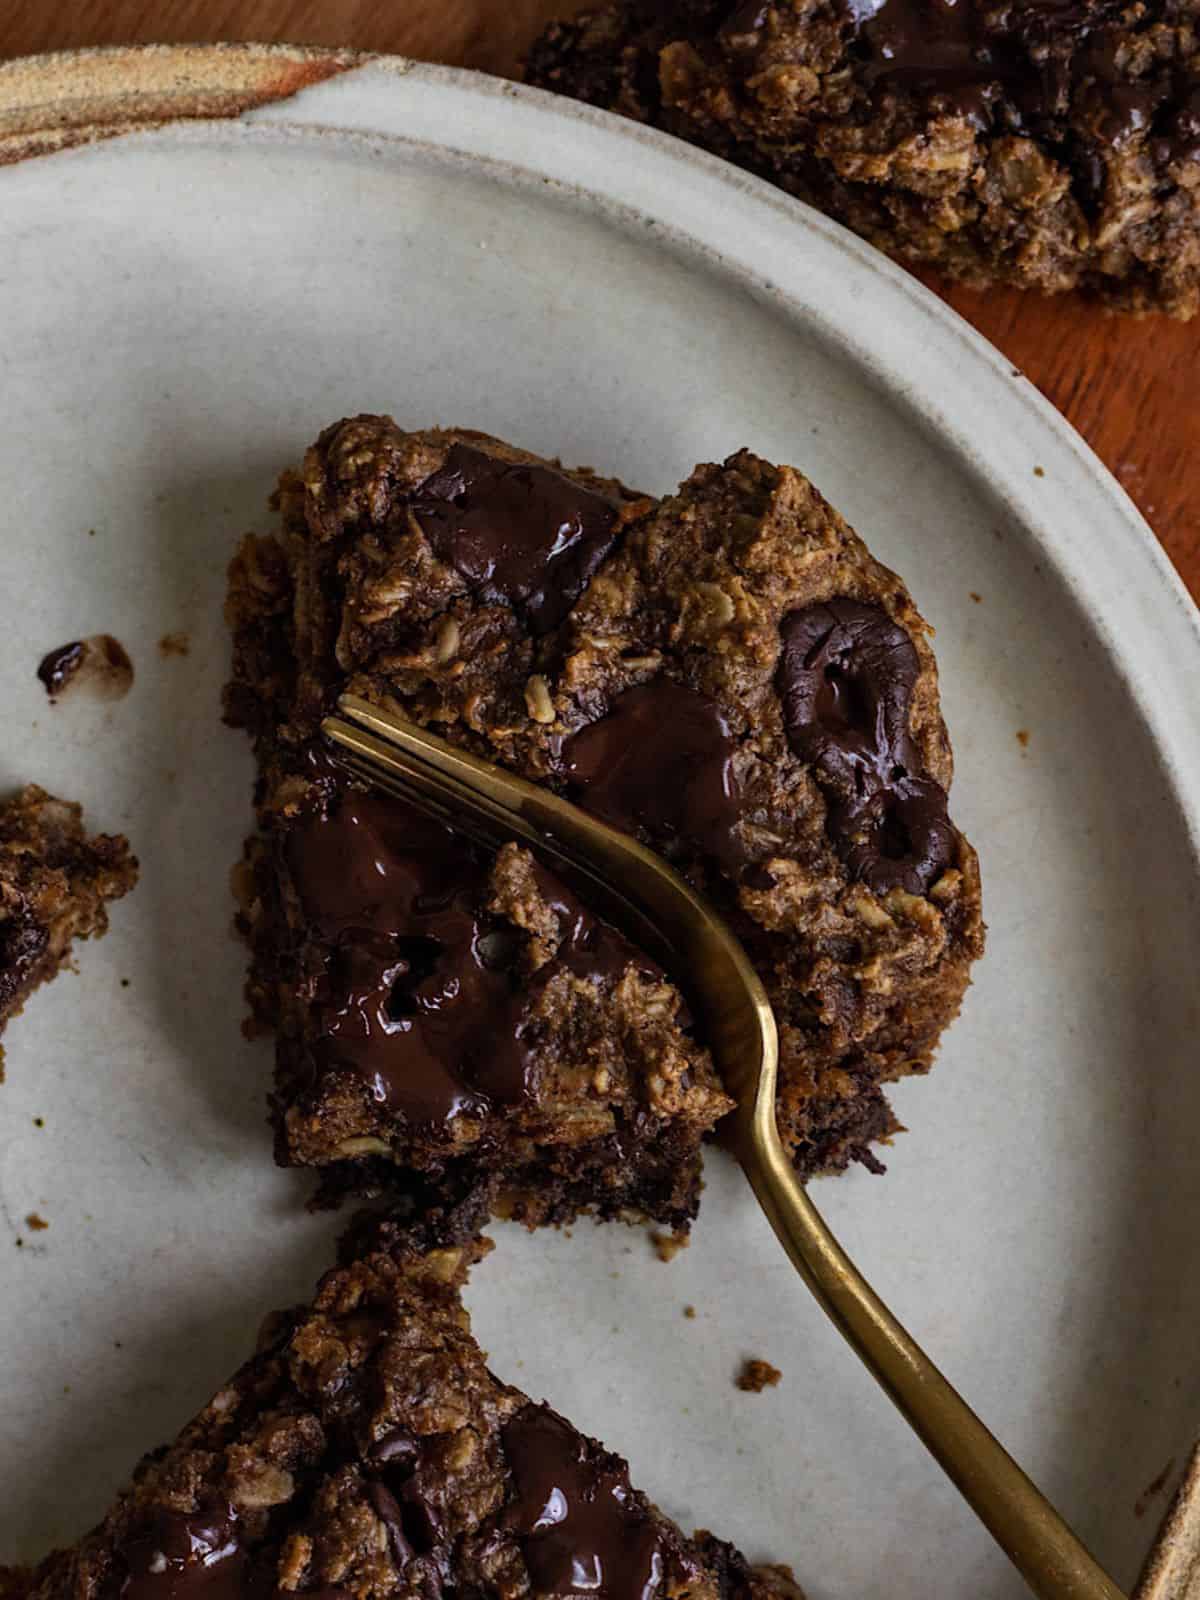 Vegan Oatmeal Chocolate Chip Blondie Bars on a plate.